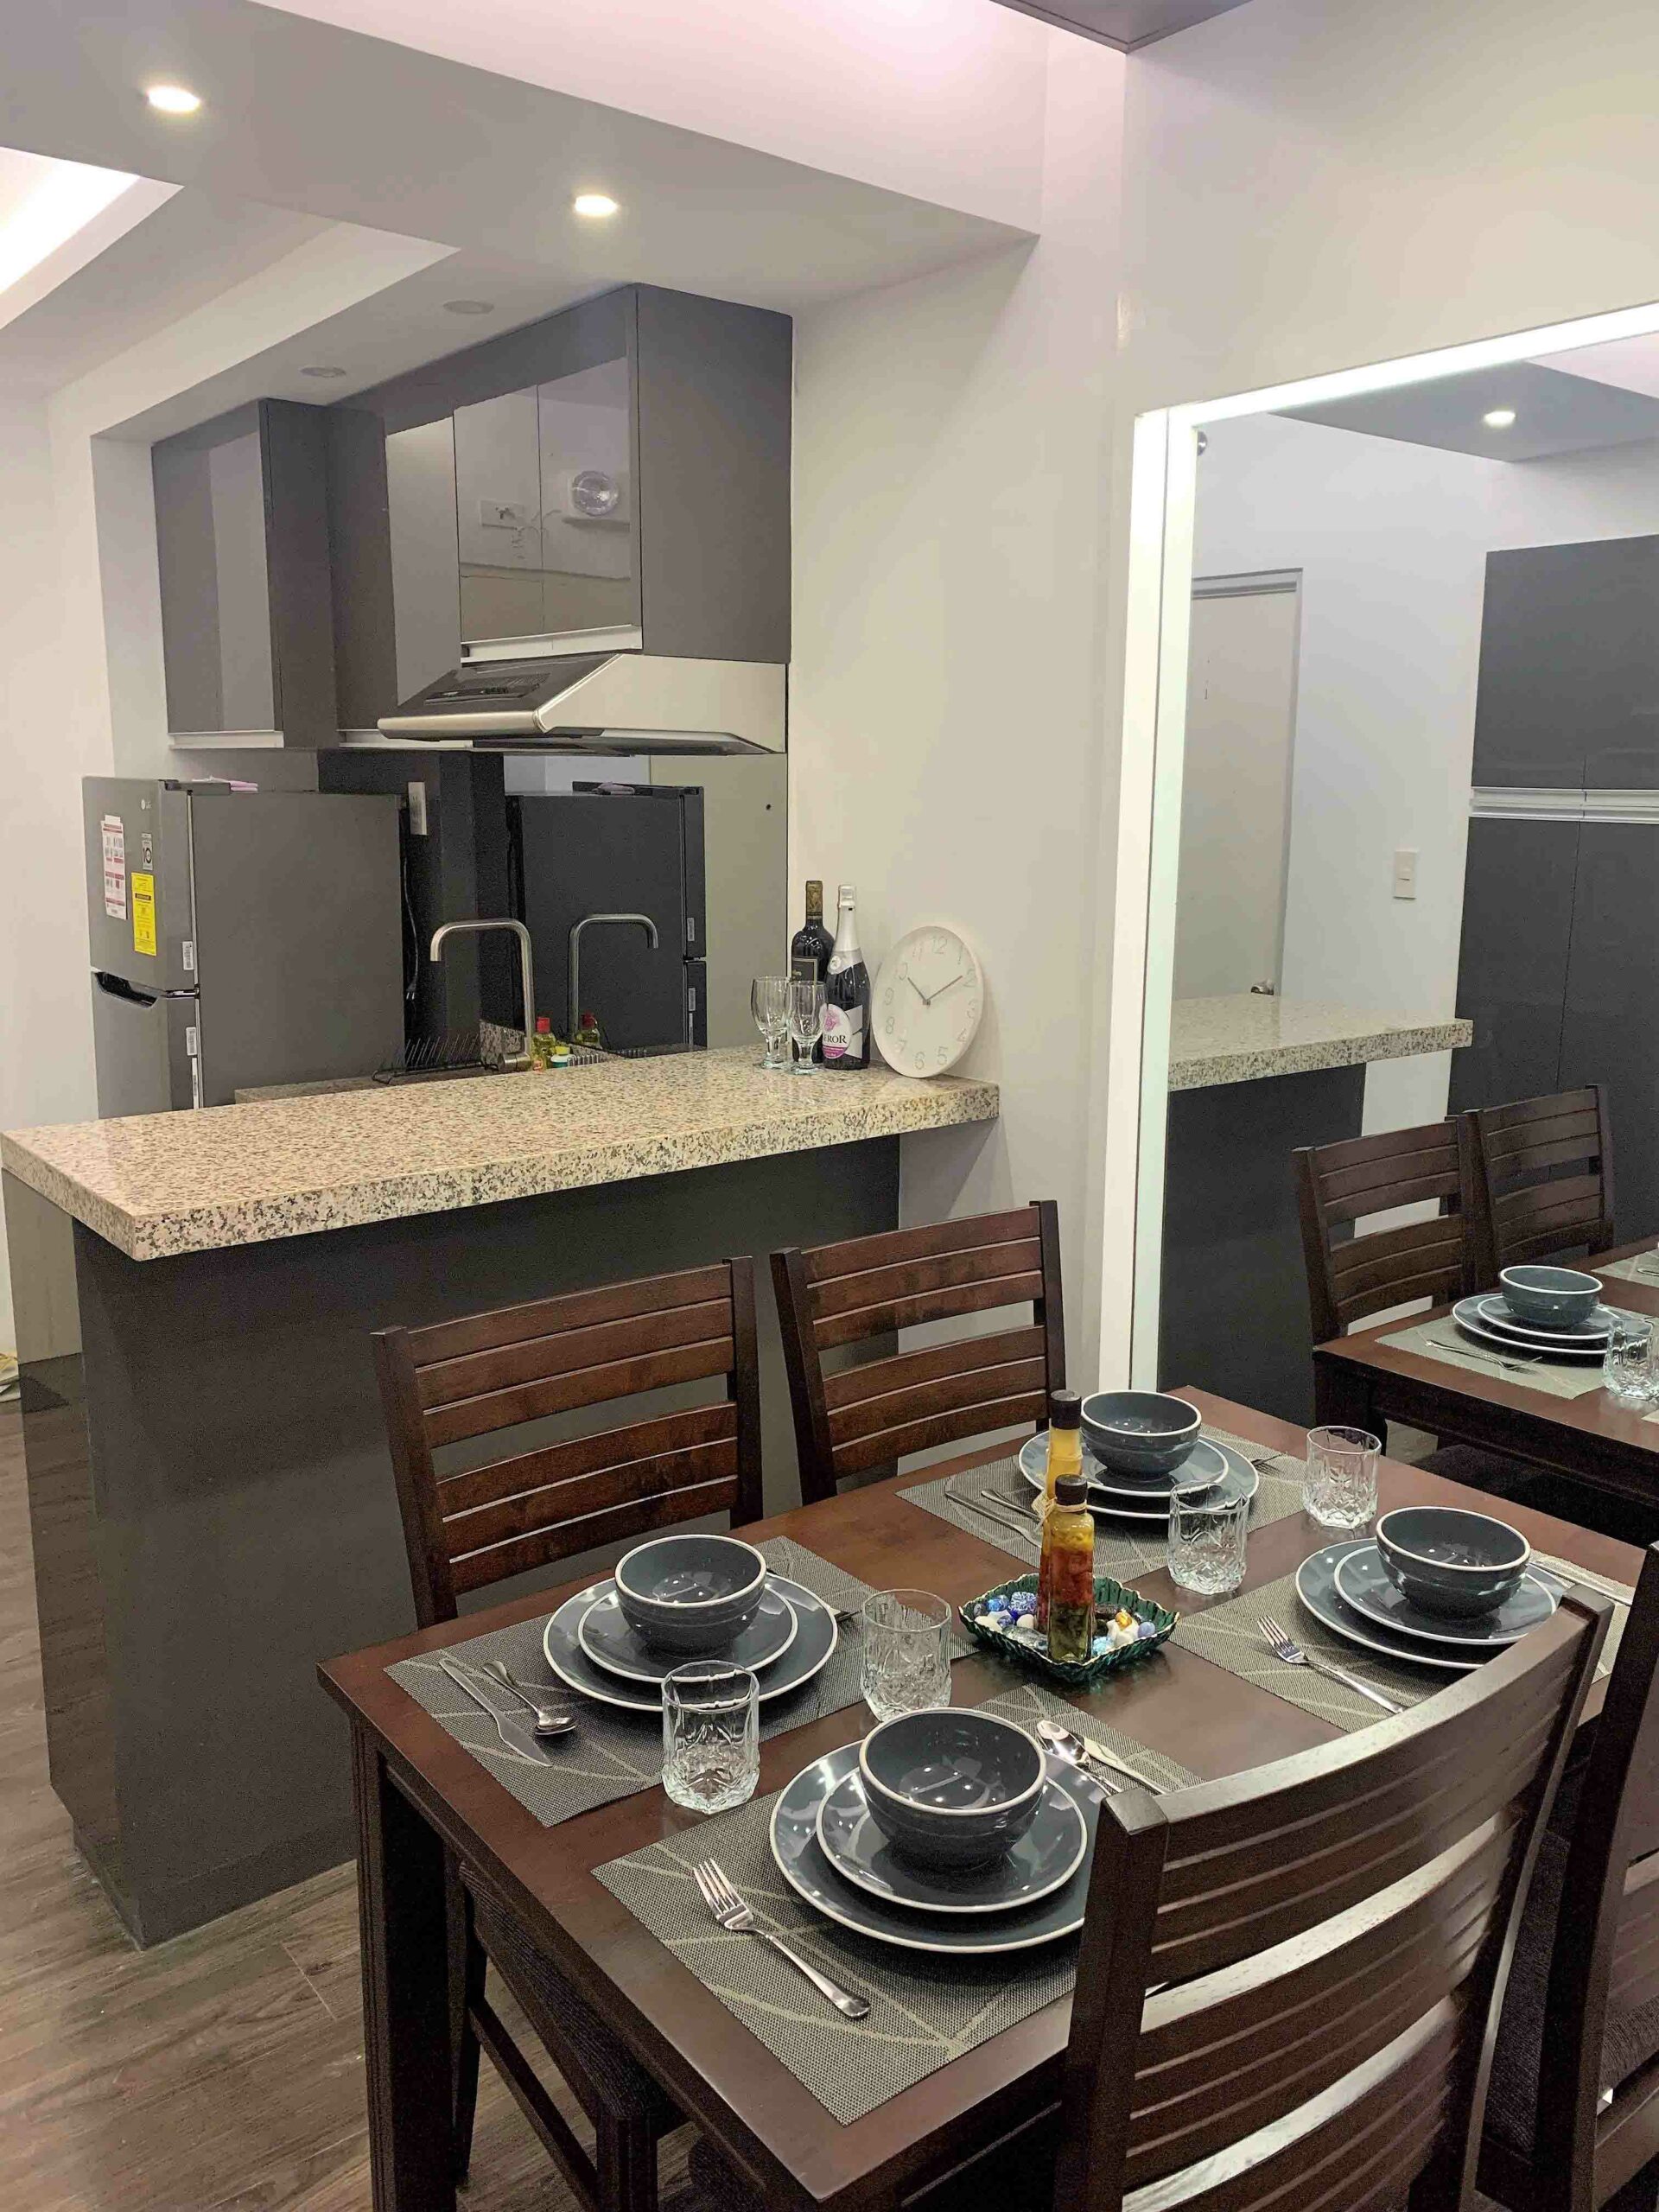 Condo Unit For Rent – 2nd Floor Clara B at Amaia Steps Nuvali